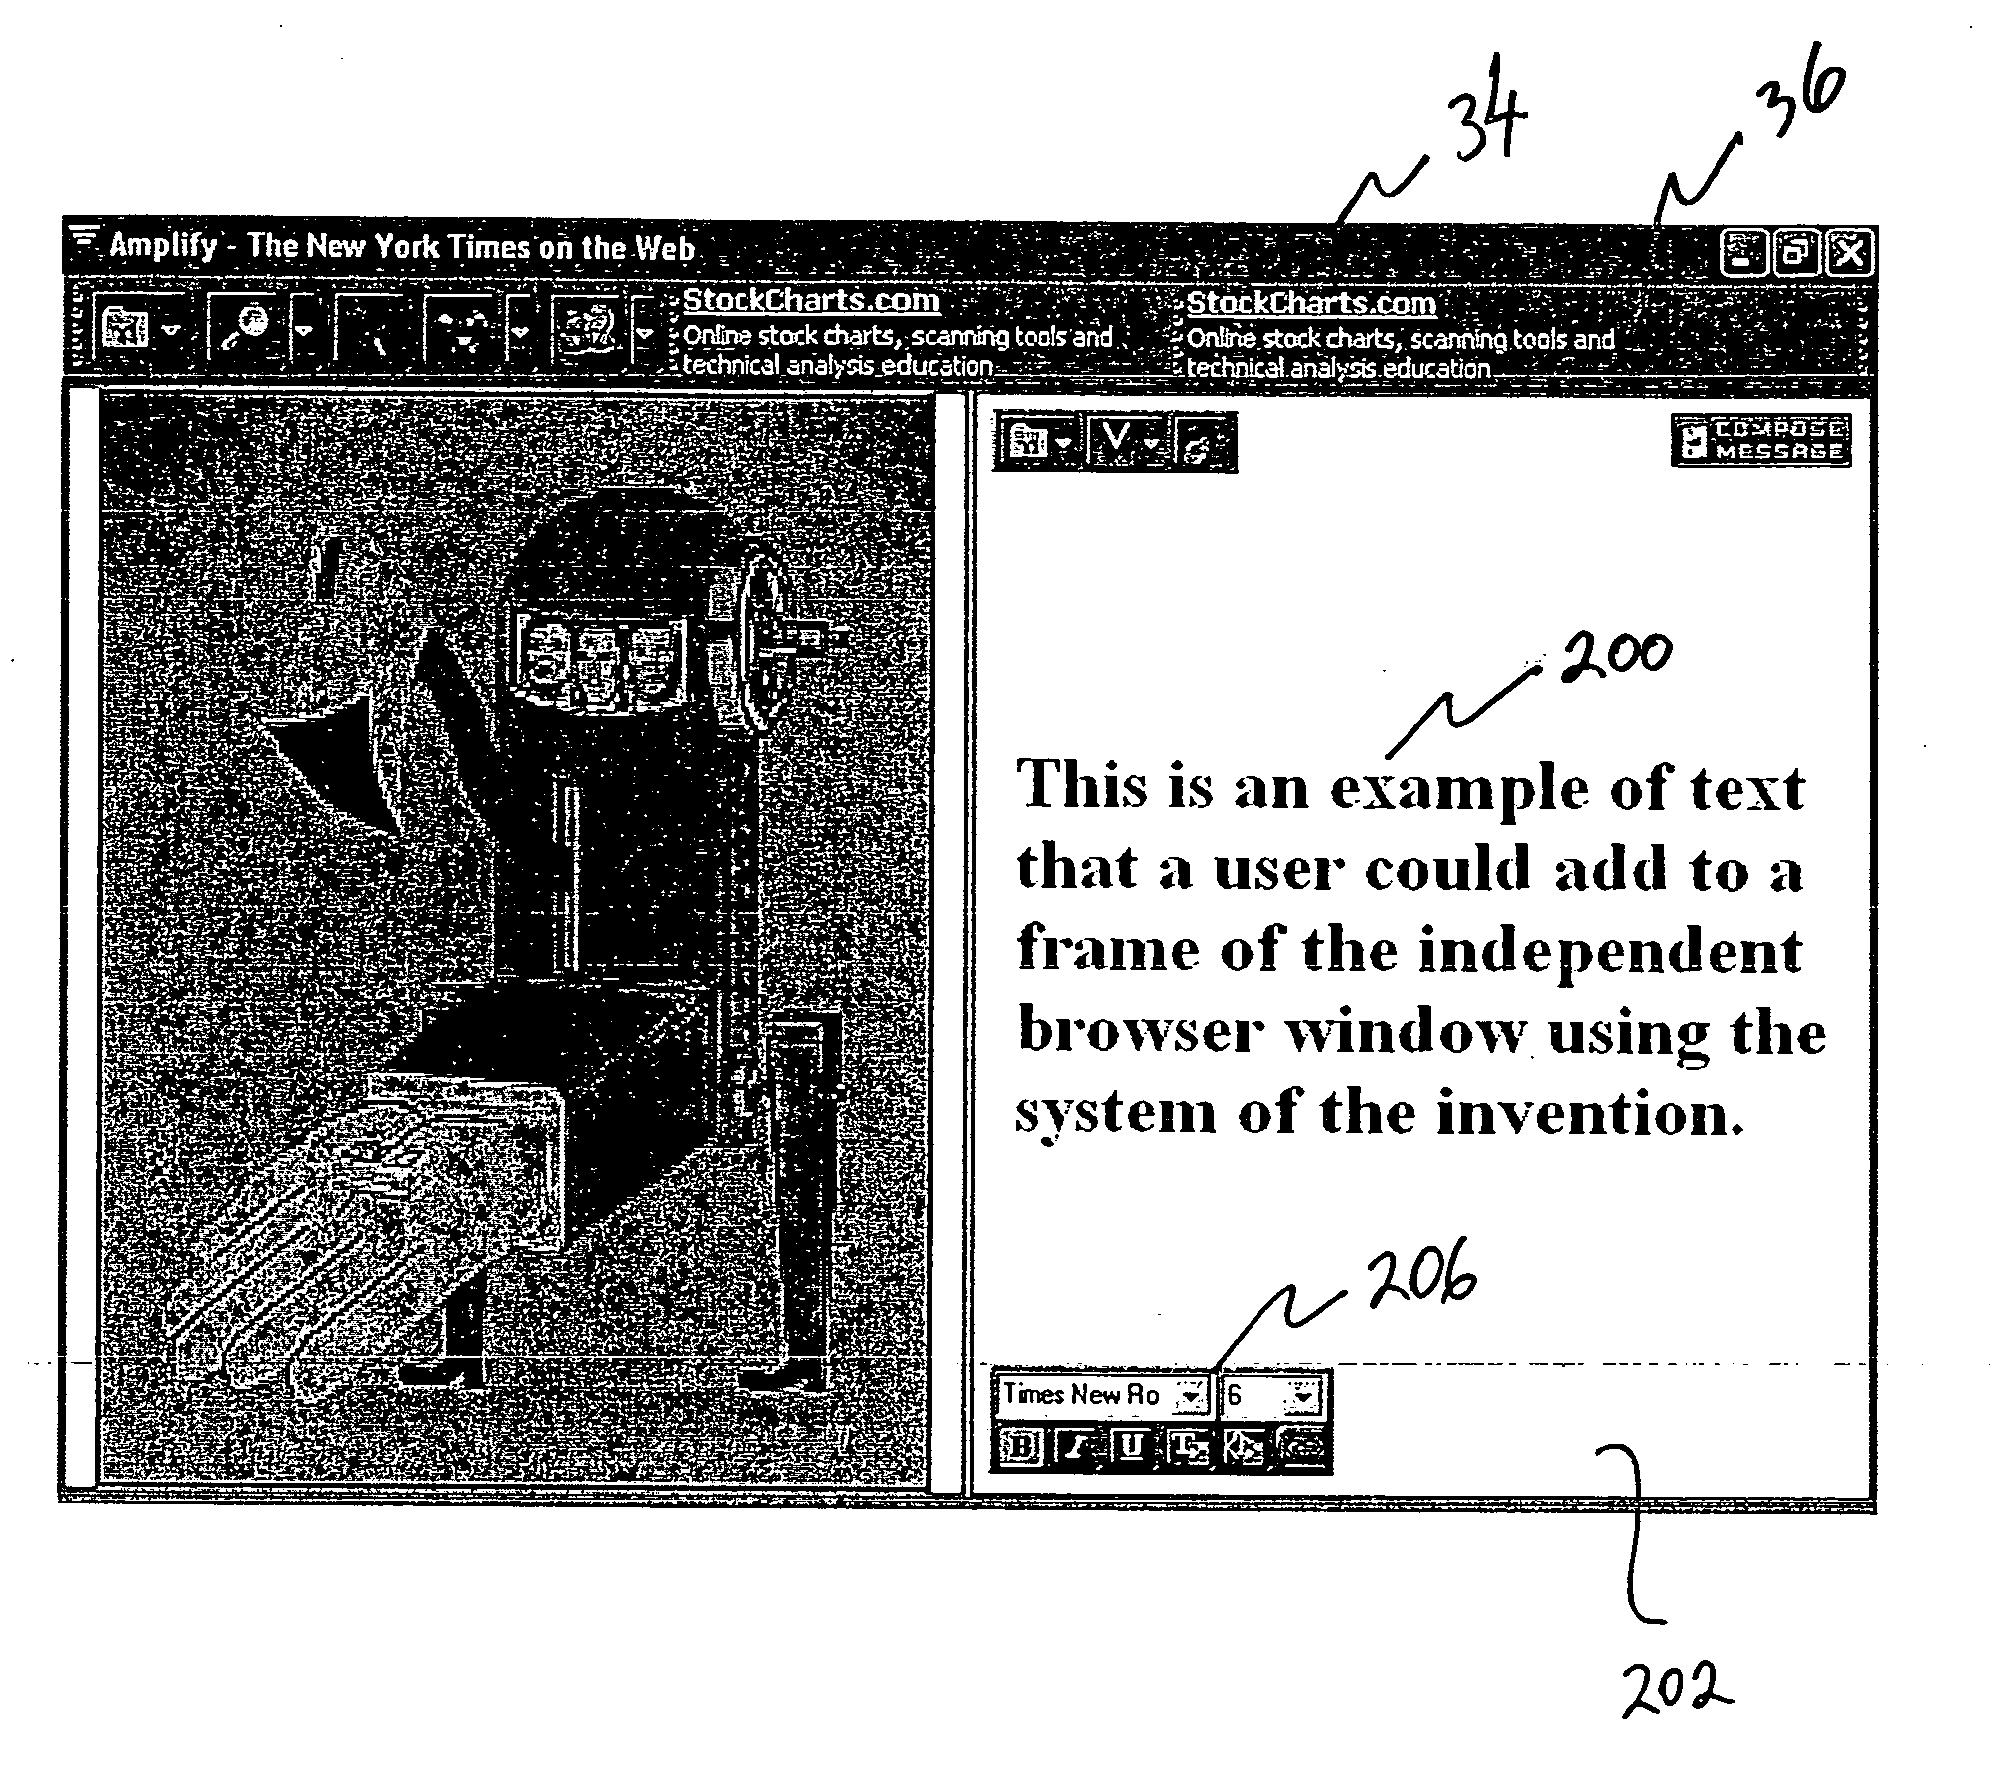 System, method and apparatus for selecting, displaying, managing, tracking and transferring access to content of web pages and other sources